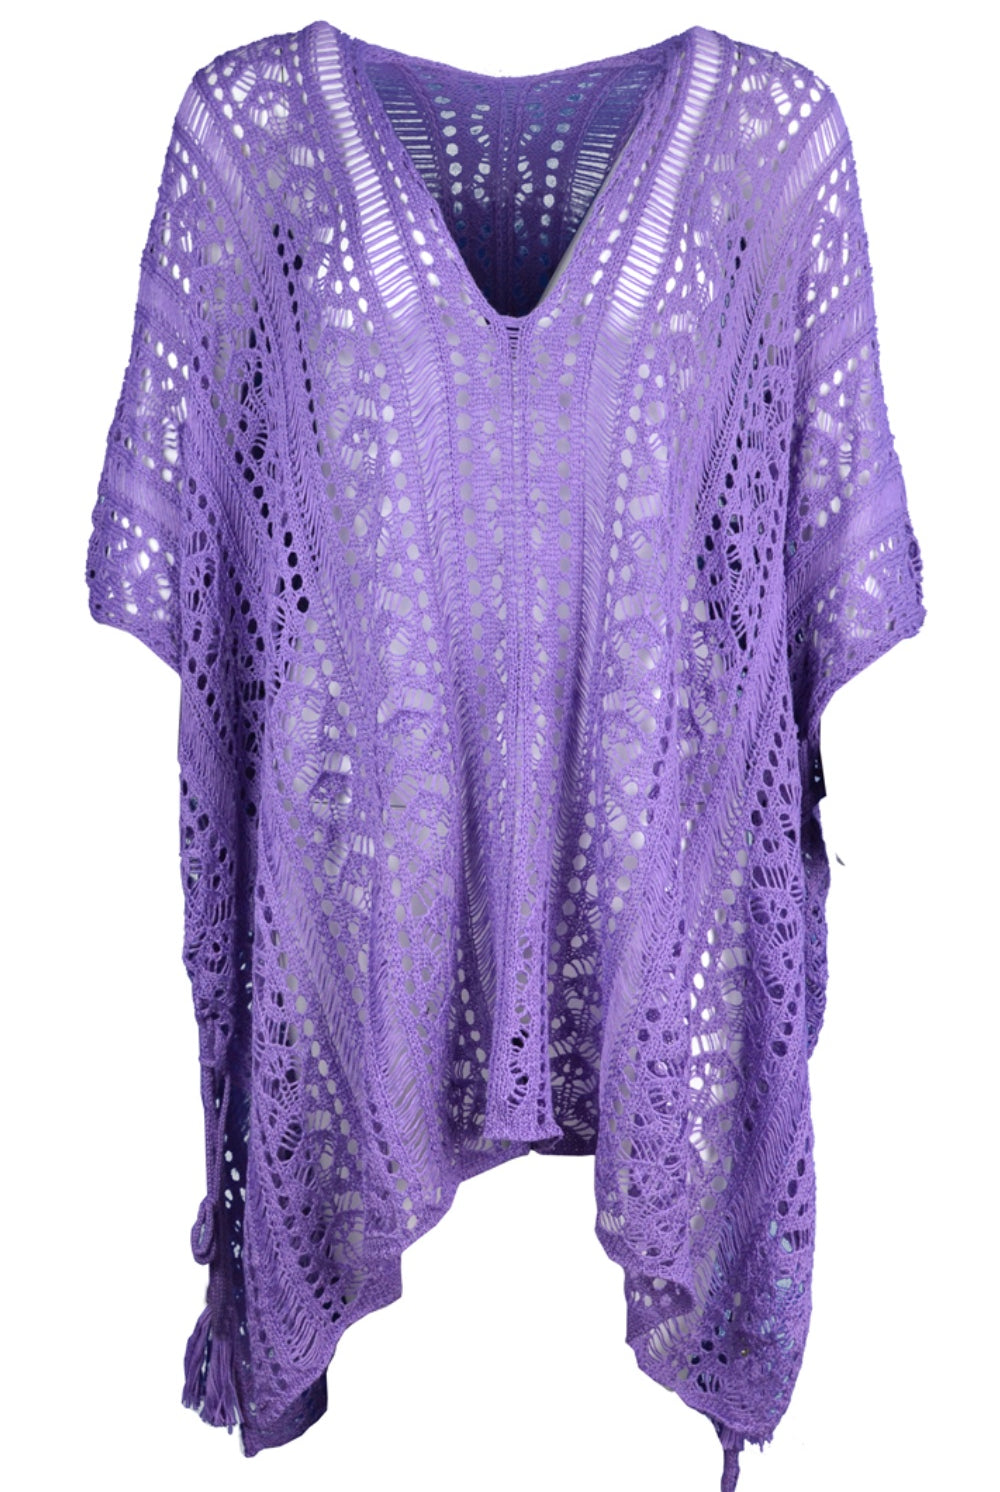 Cutout V-Neck Cover-Up with Tassel-Krush Kandy, Women's Online Fashion Boutique Located in Phoenix, Arizona (Scottsdale Area)